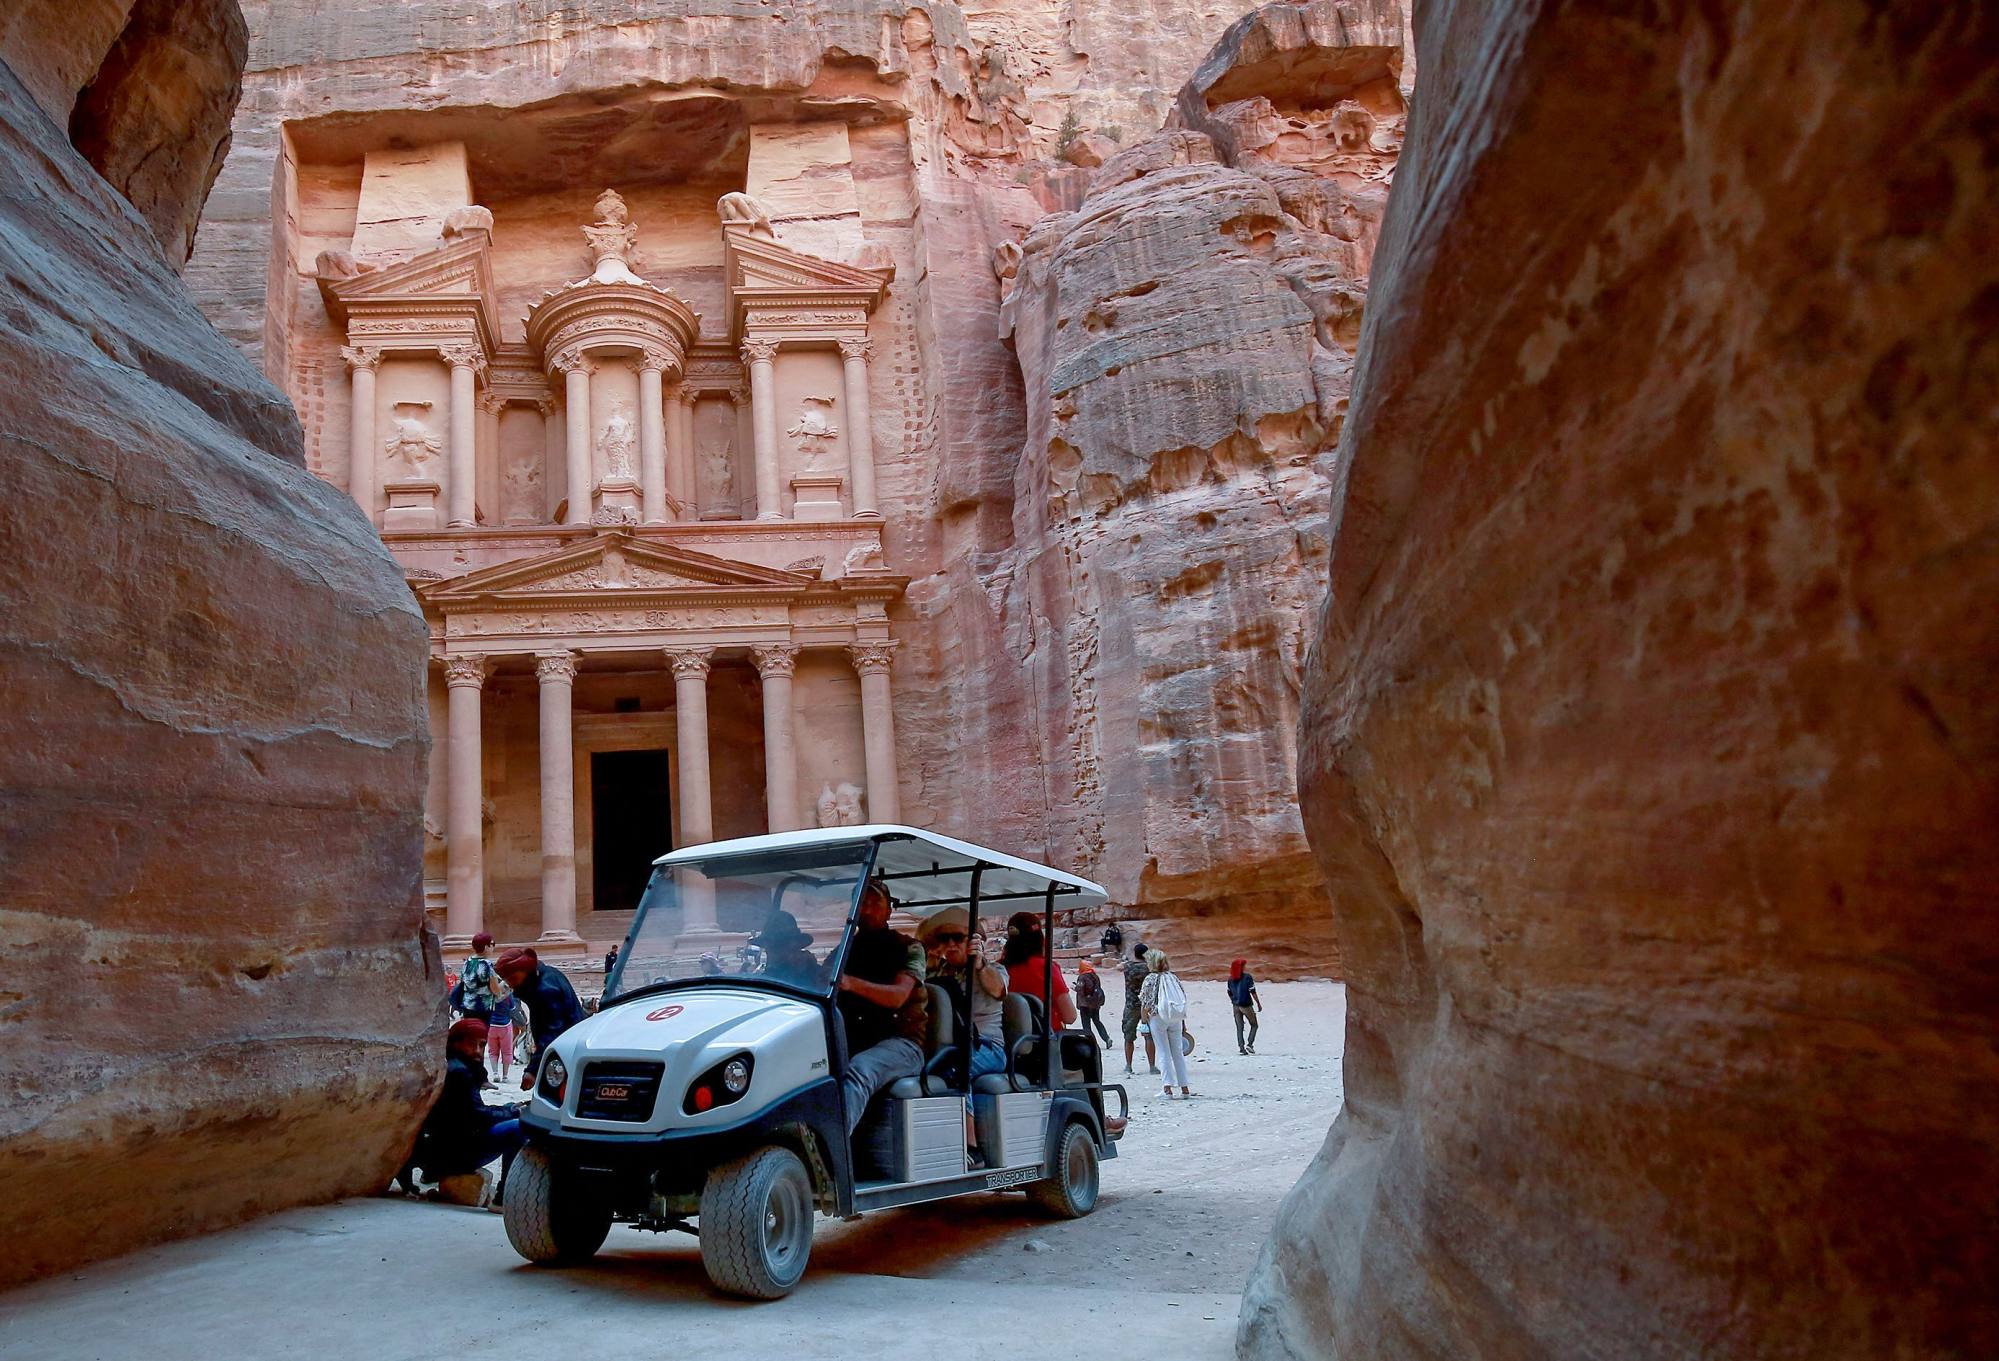 Tourists ride an electric cart, during their trip to Jordan’s famed ancient city of Petra, some 230km south of the capital Amman. Photo: AFP